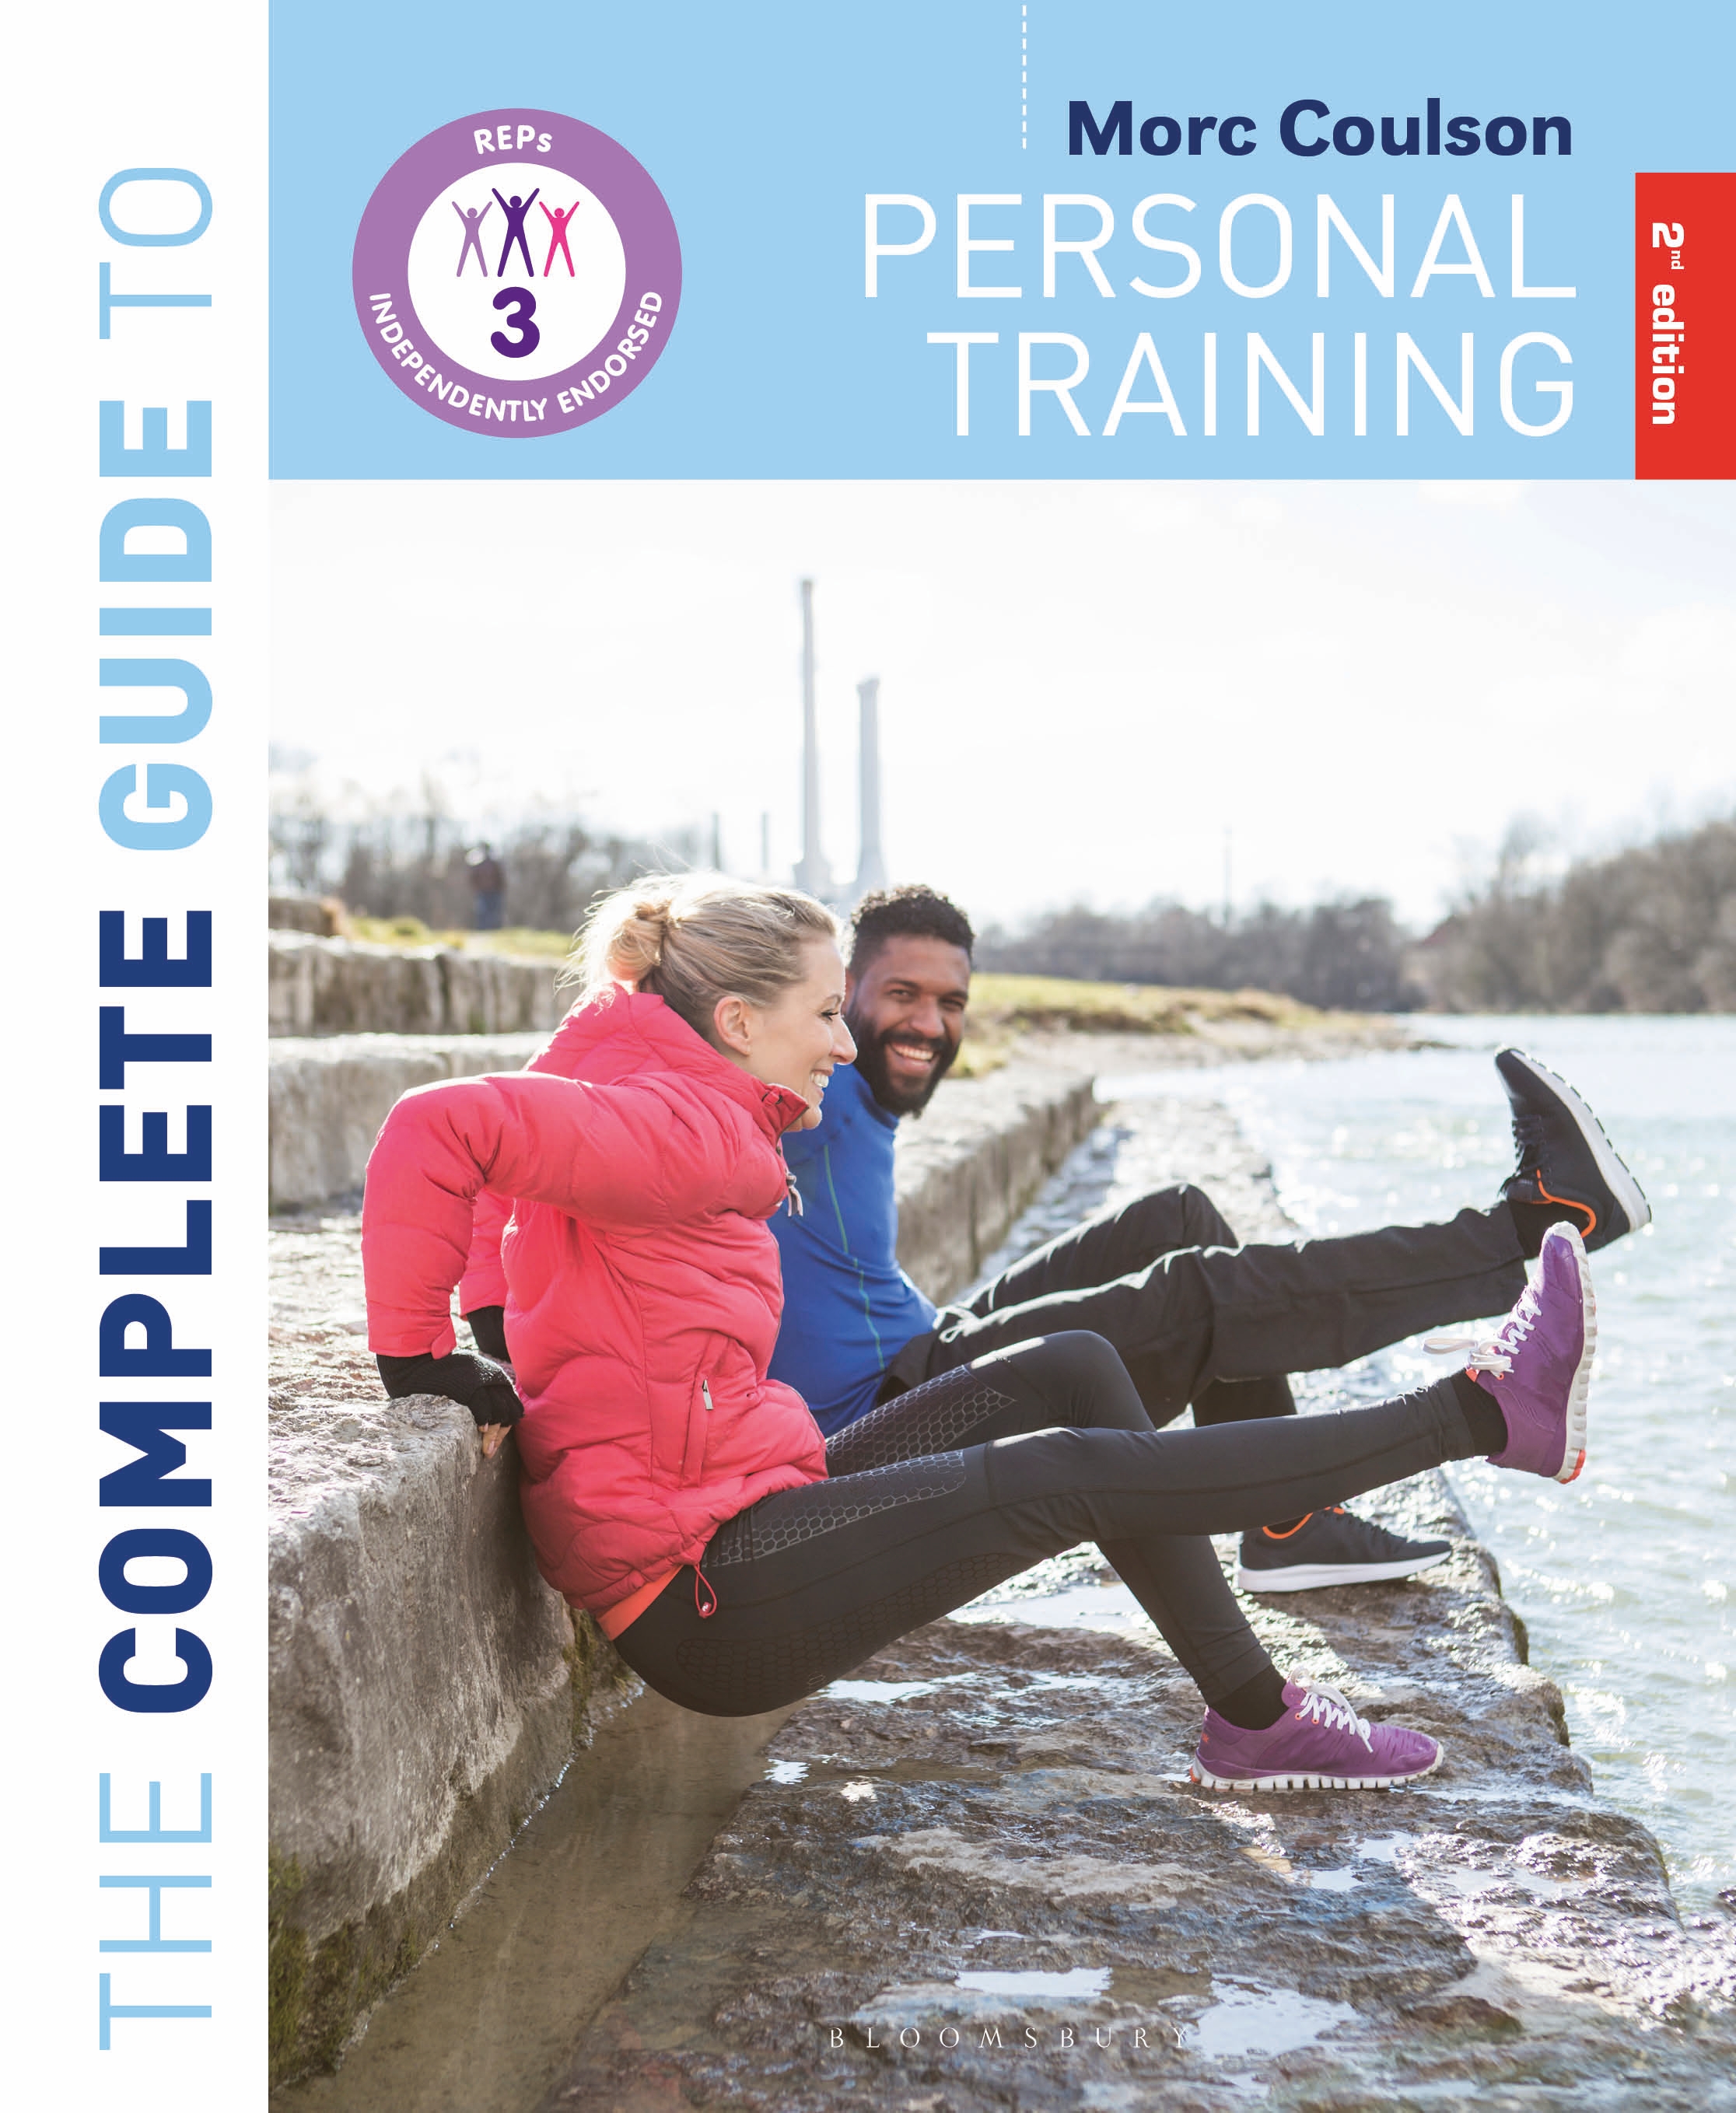 The Complete Guide to Personal Training